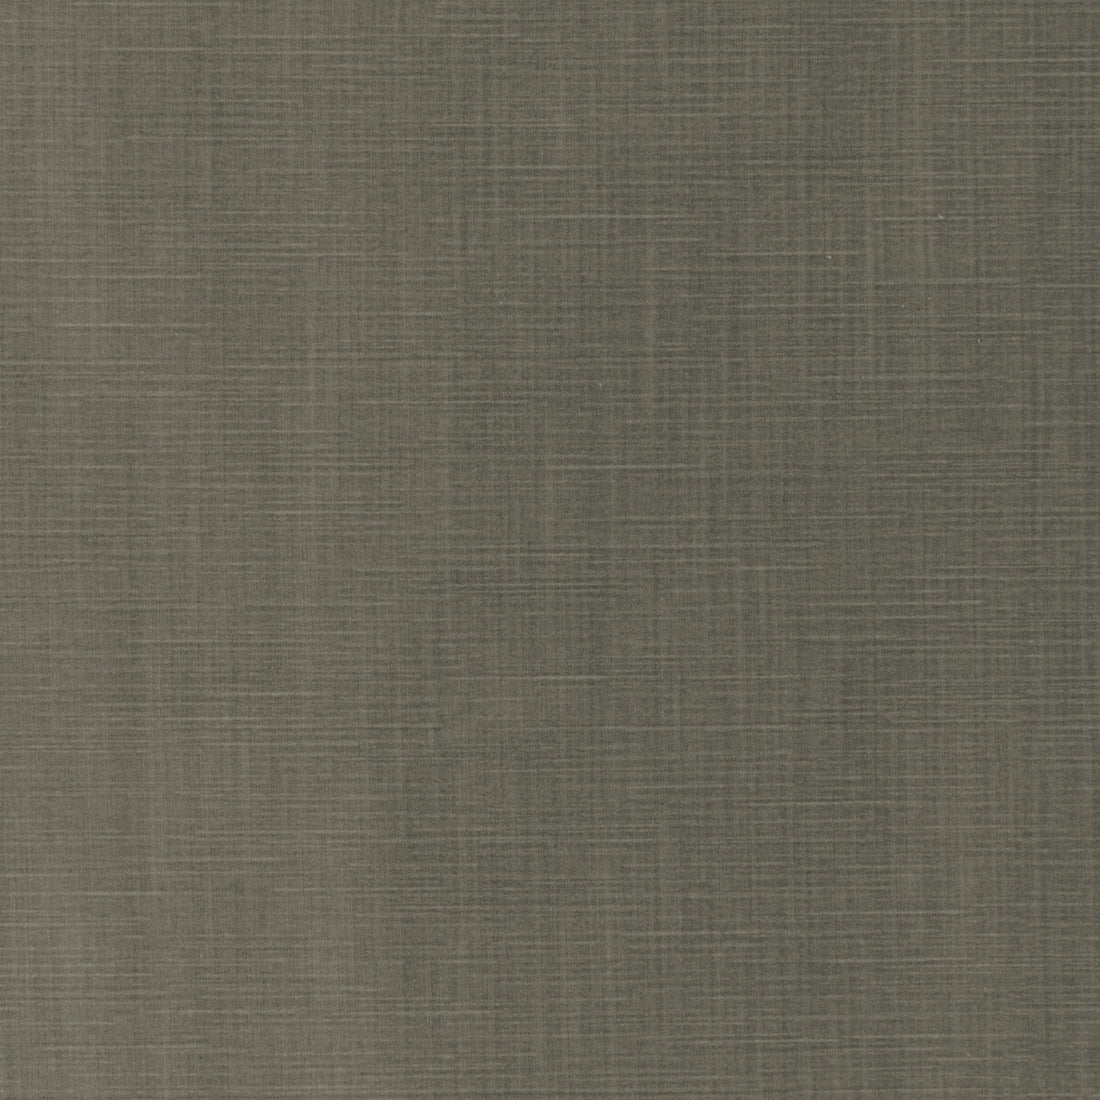 Gentry Velvet fabric in platinum color - pattern 36067.11.0 - by Kravet Couture